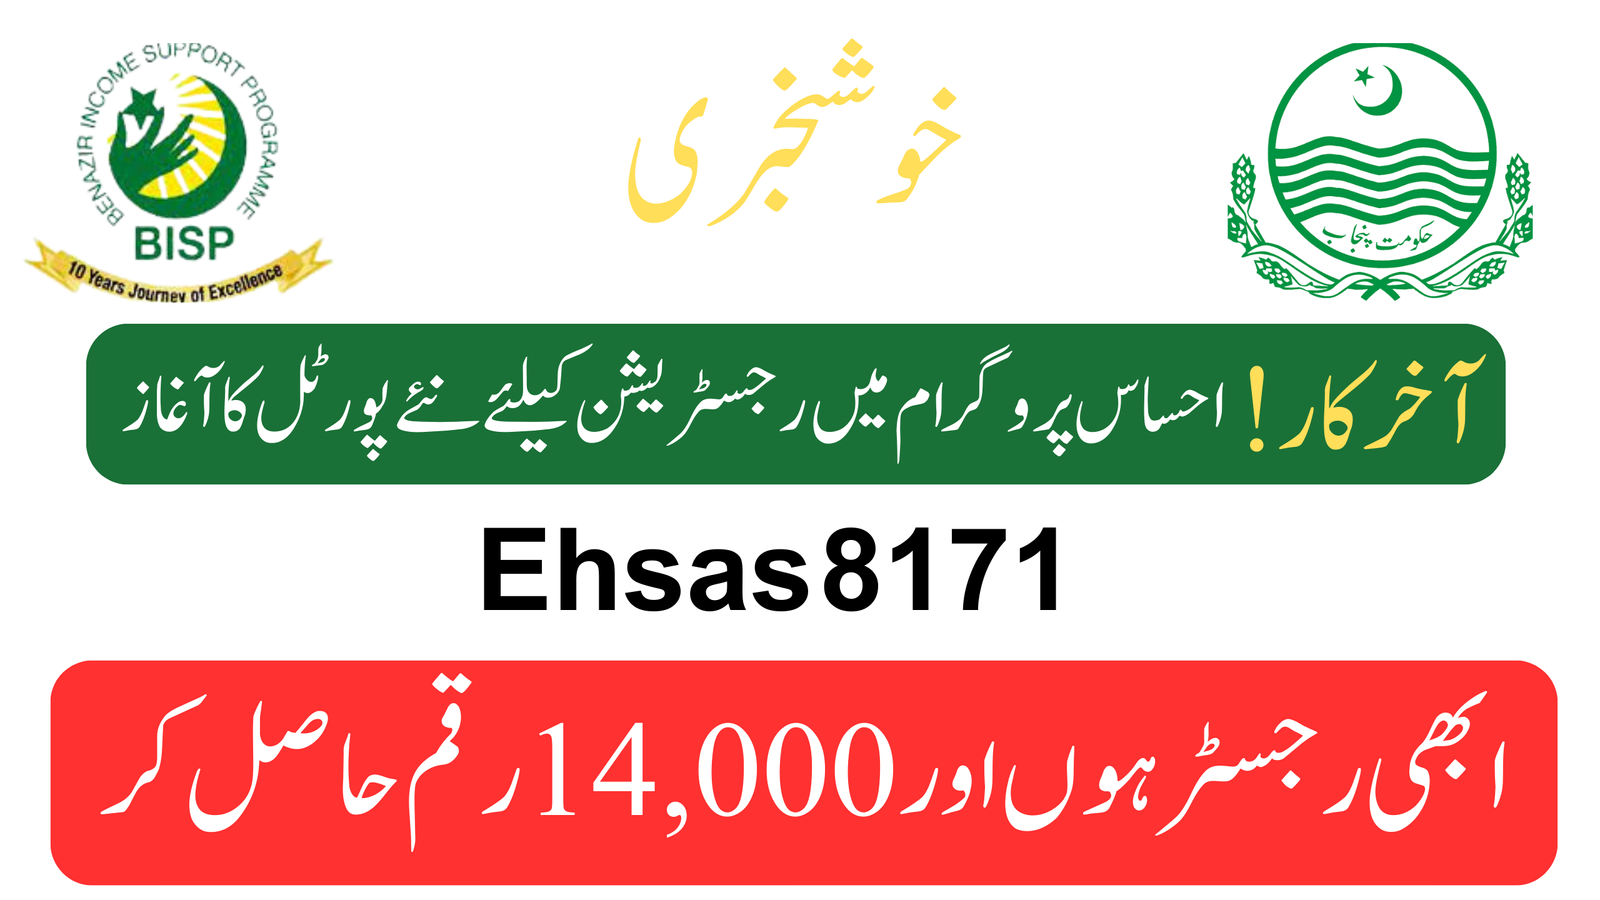 At last! Launch of new portal for registration in Ehsaas program (2023)